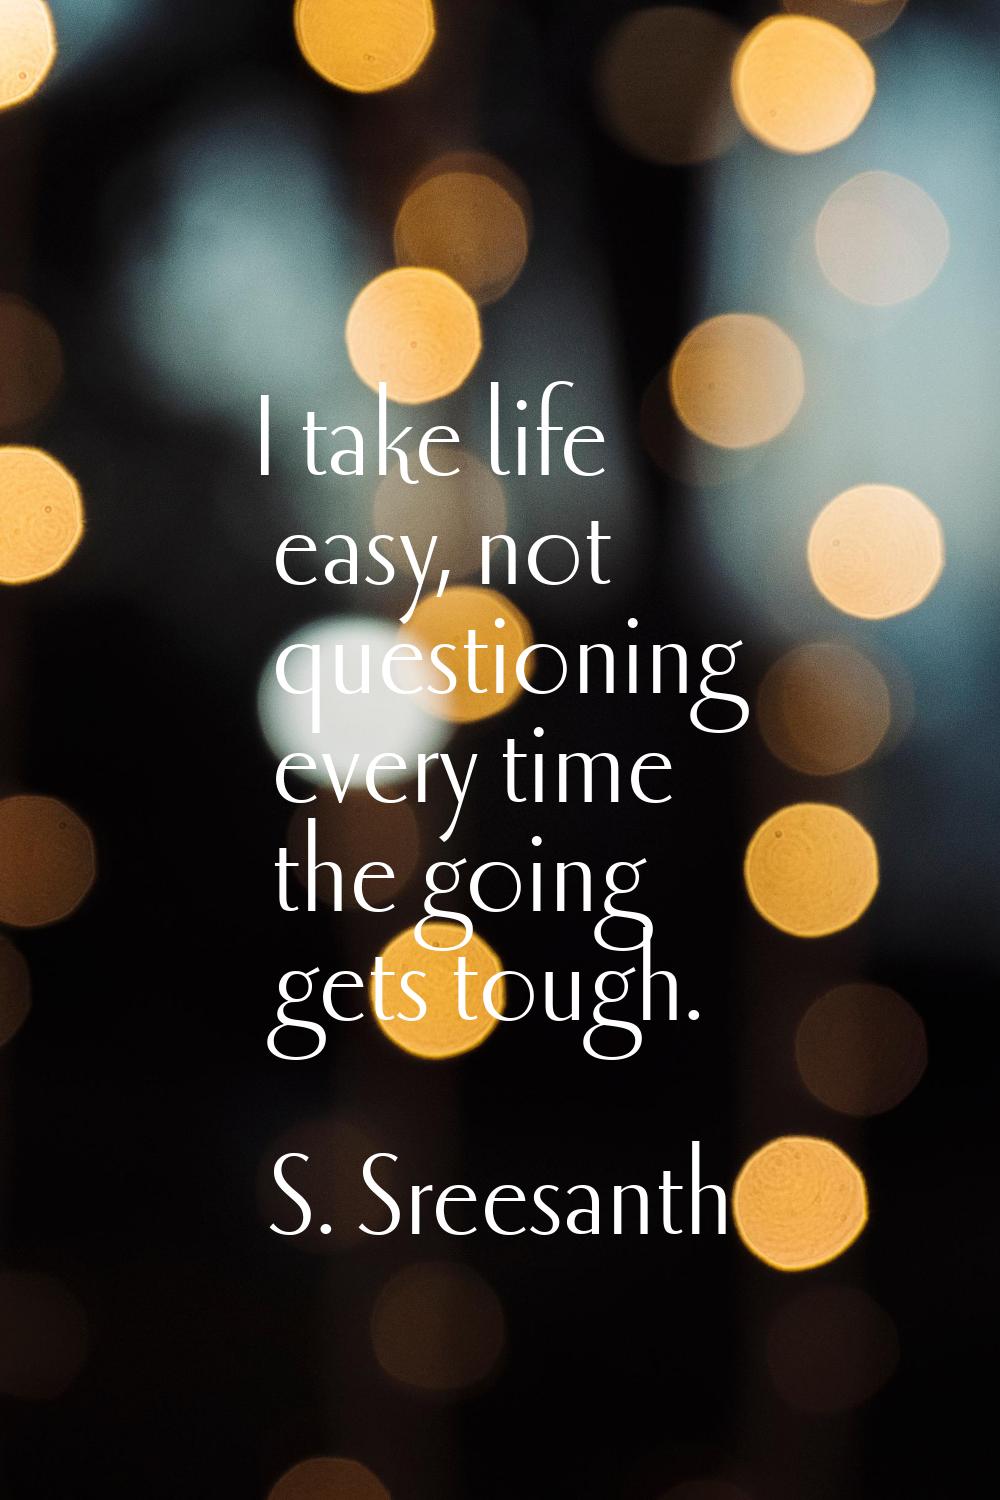 I take life easy, not questioning every time the going gets tough.